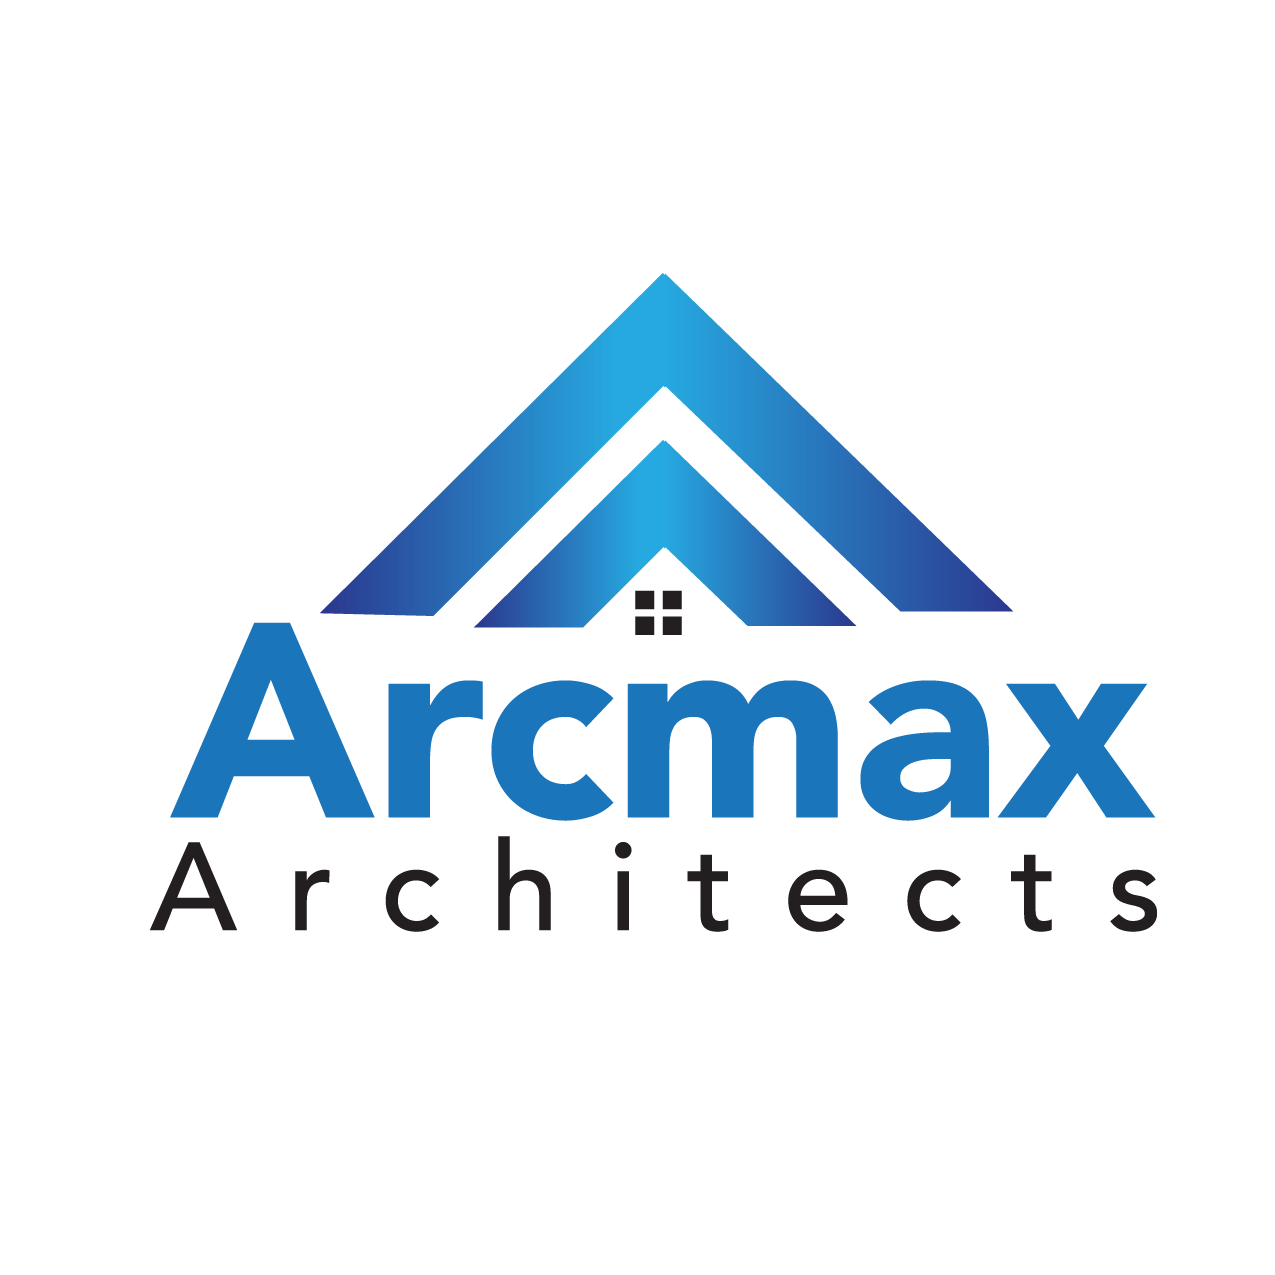 ArcMax Architects & Planners|Legal Services|Professional Services